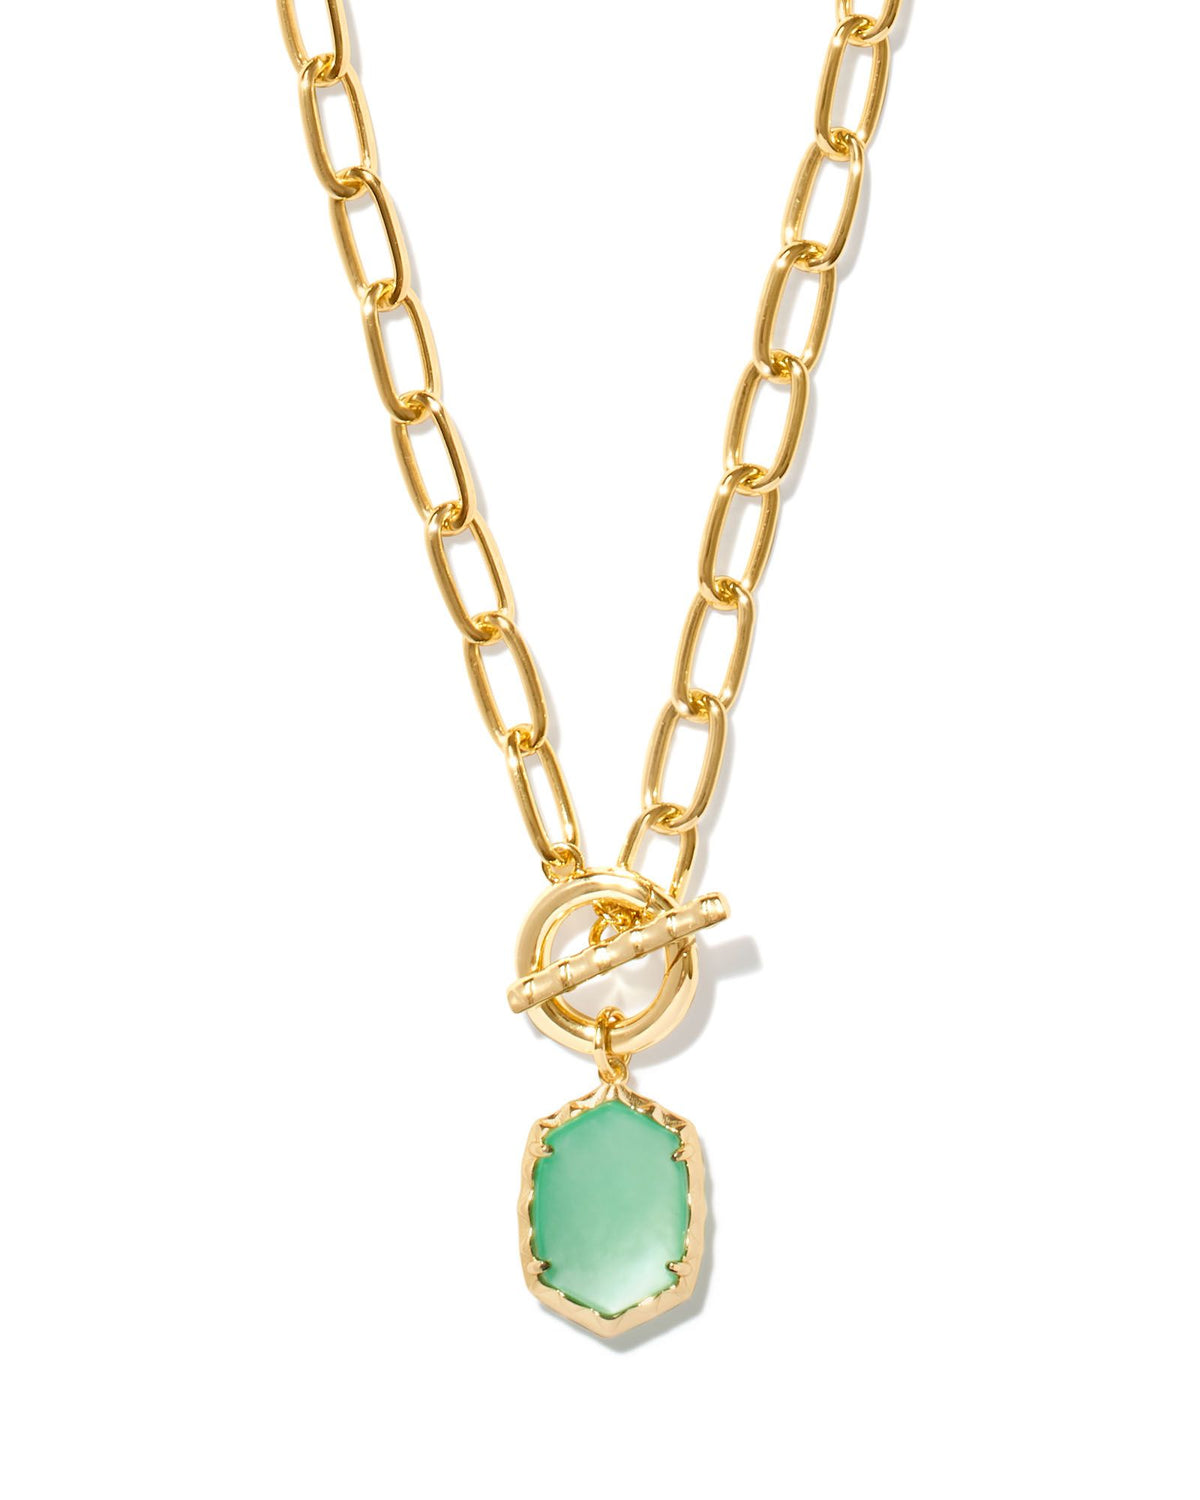 Daphne Link and Chain Necklace in Gold Light Green Mother of Pearl by Kendra Scott--Lemons and Limes Boutique